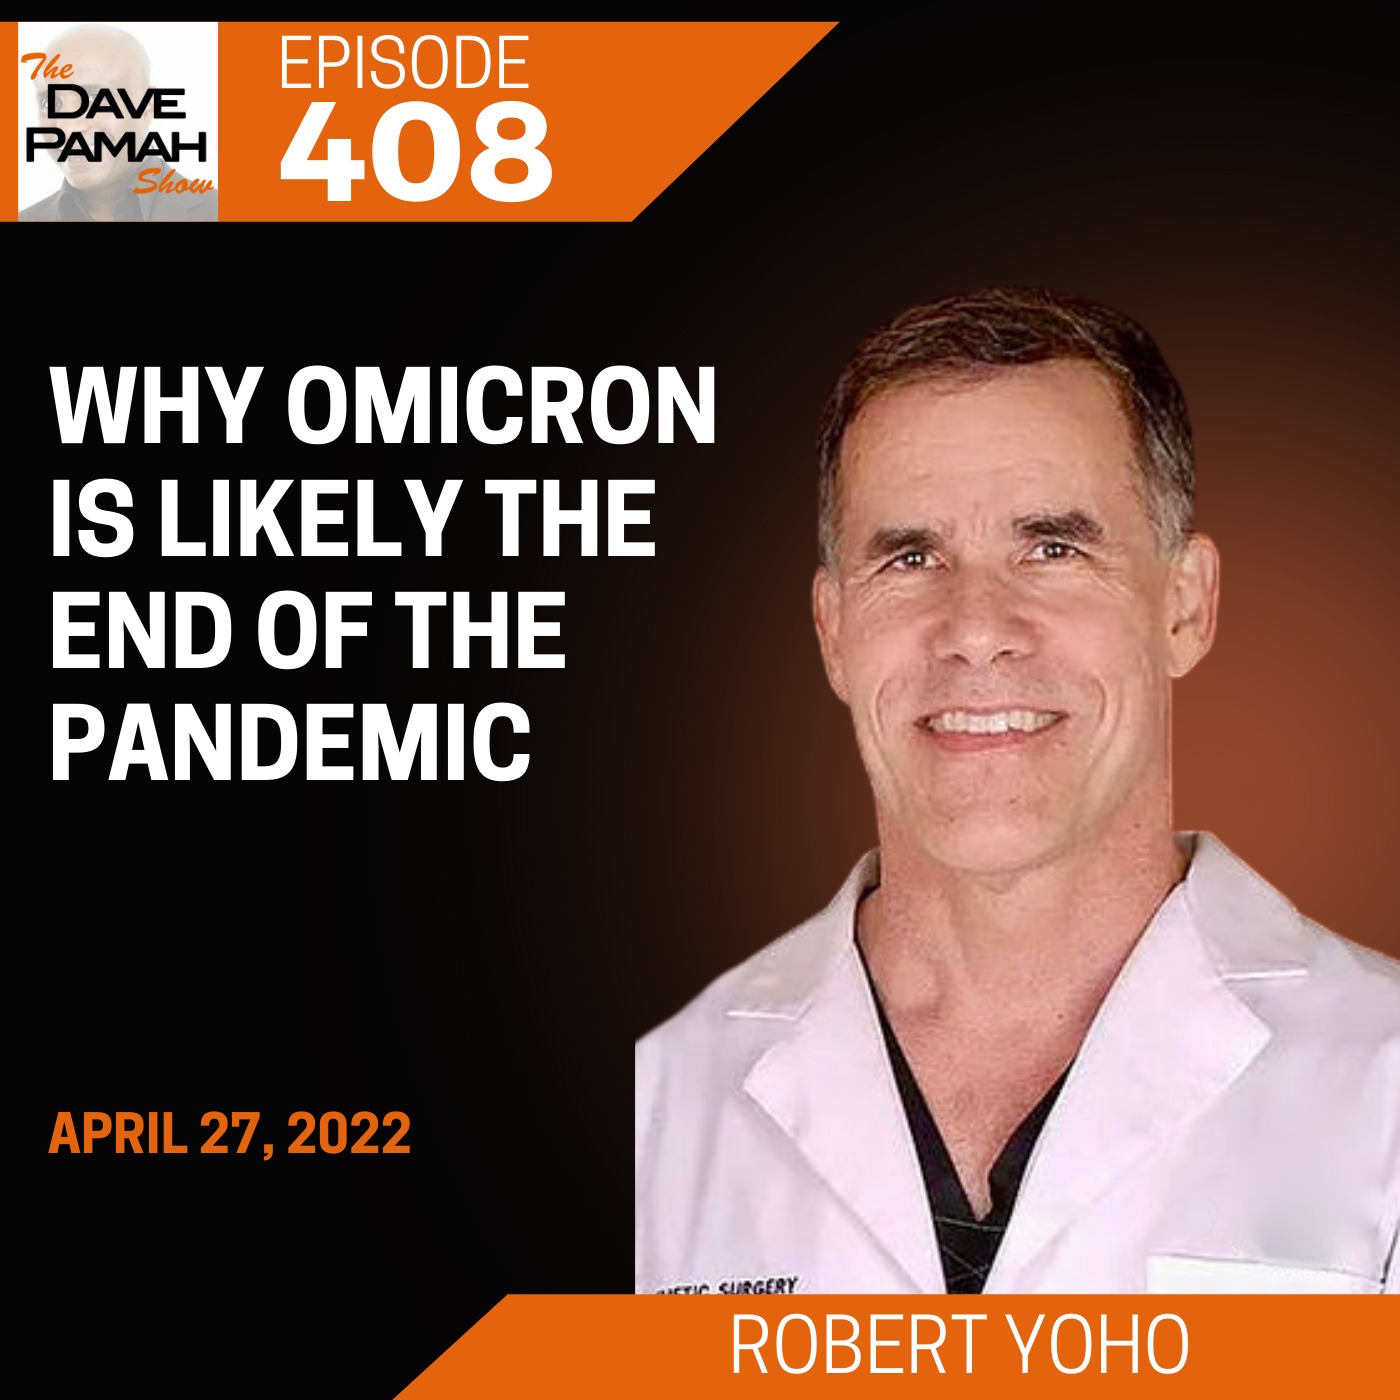 Why omicron is likely the end of the pandemic with Robert Yoho